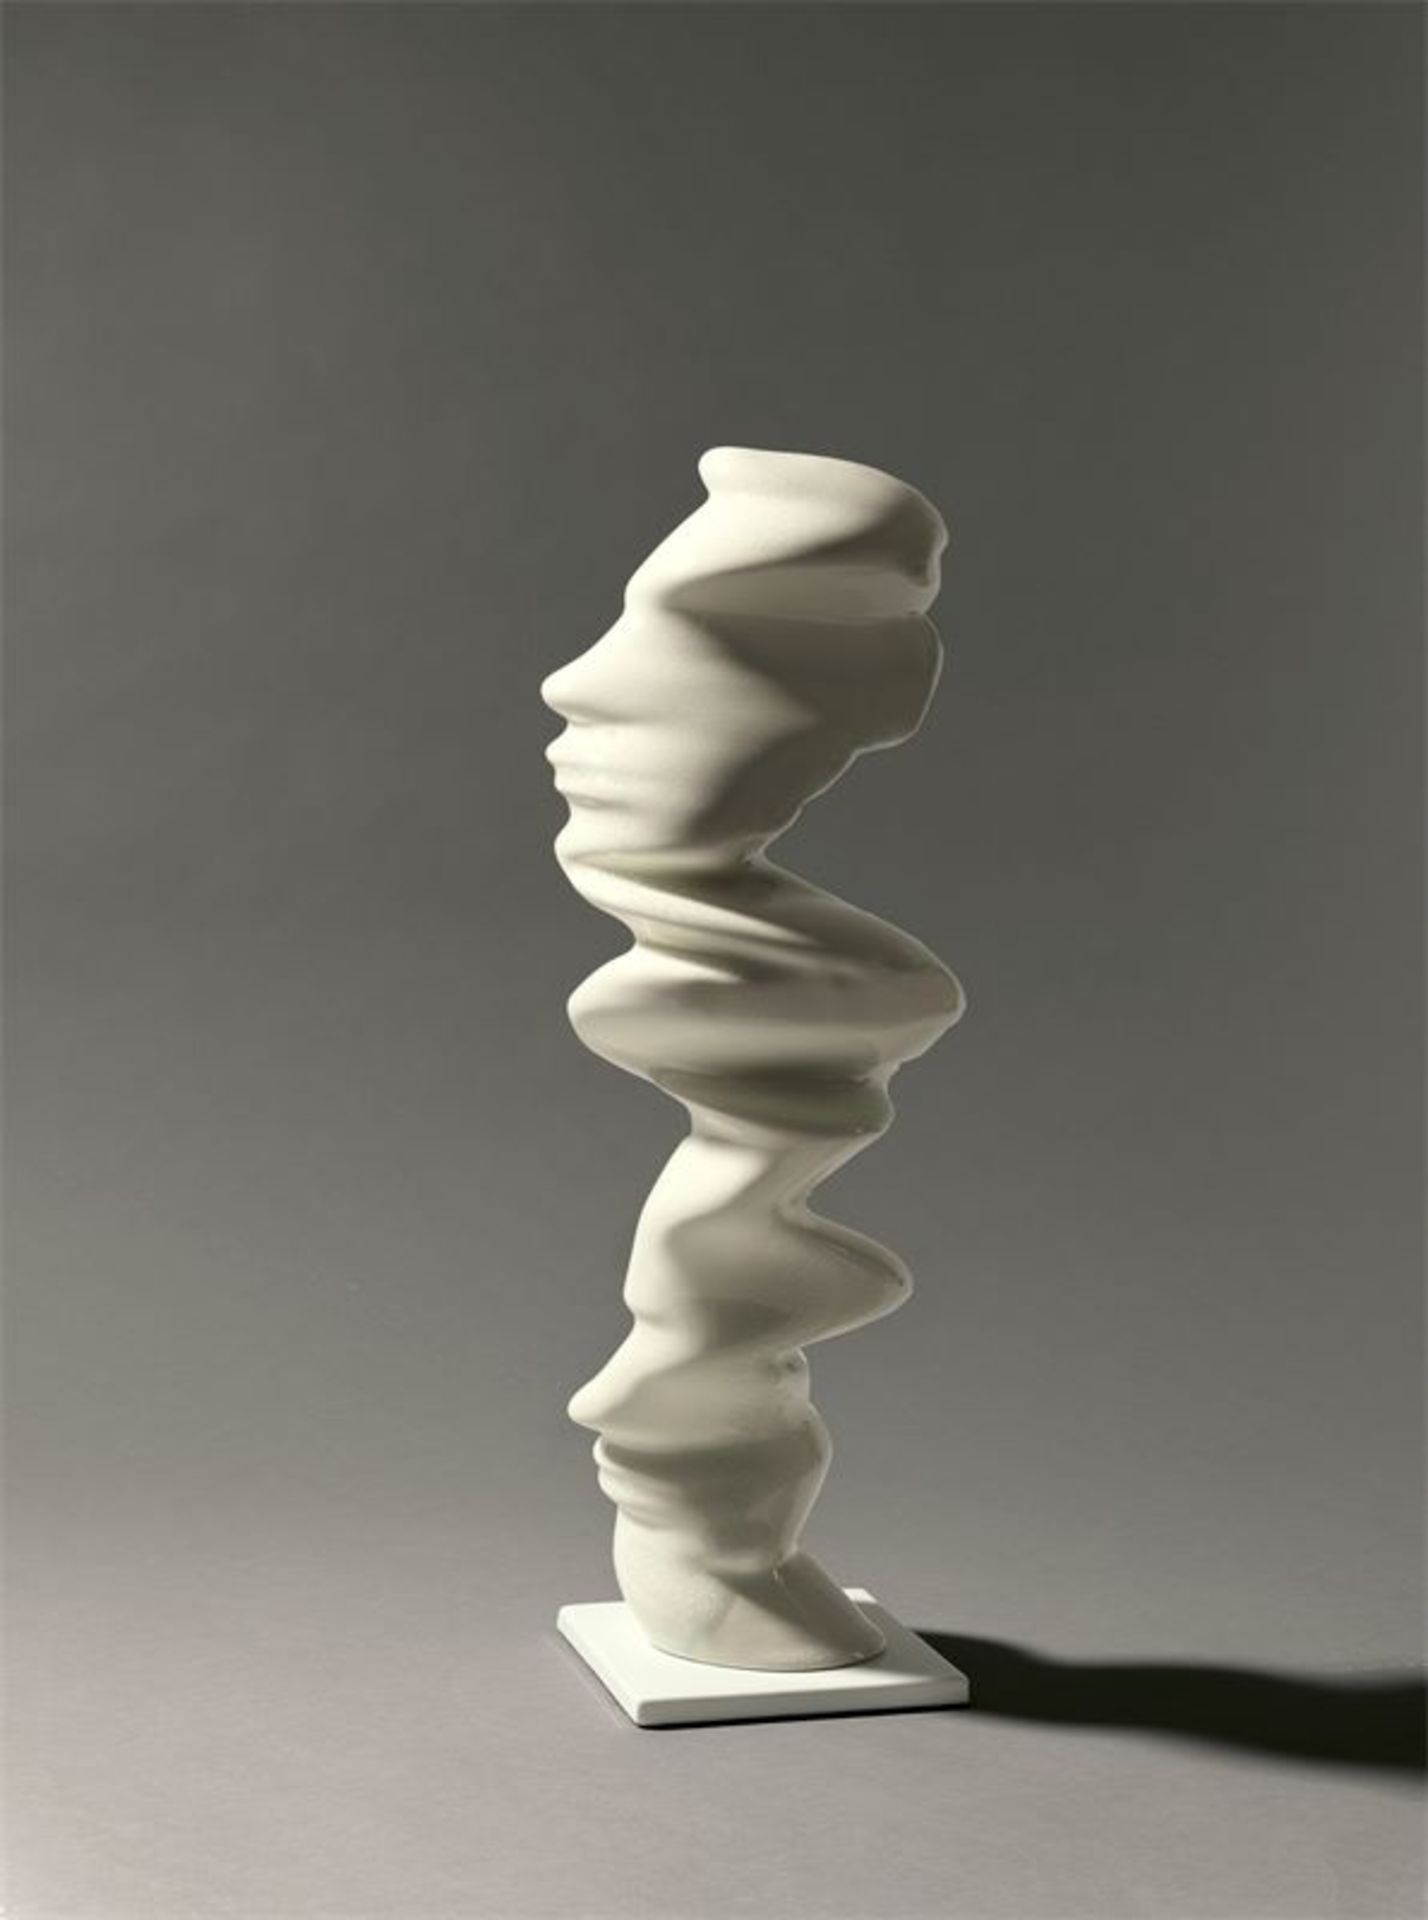 Tony Cragg (Liverpool 1949 – lebt in Wuppertal)